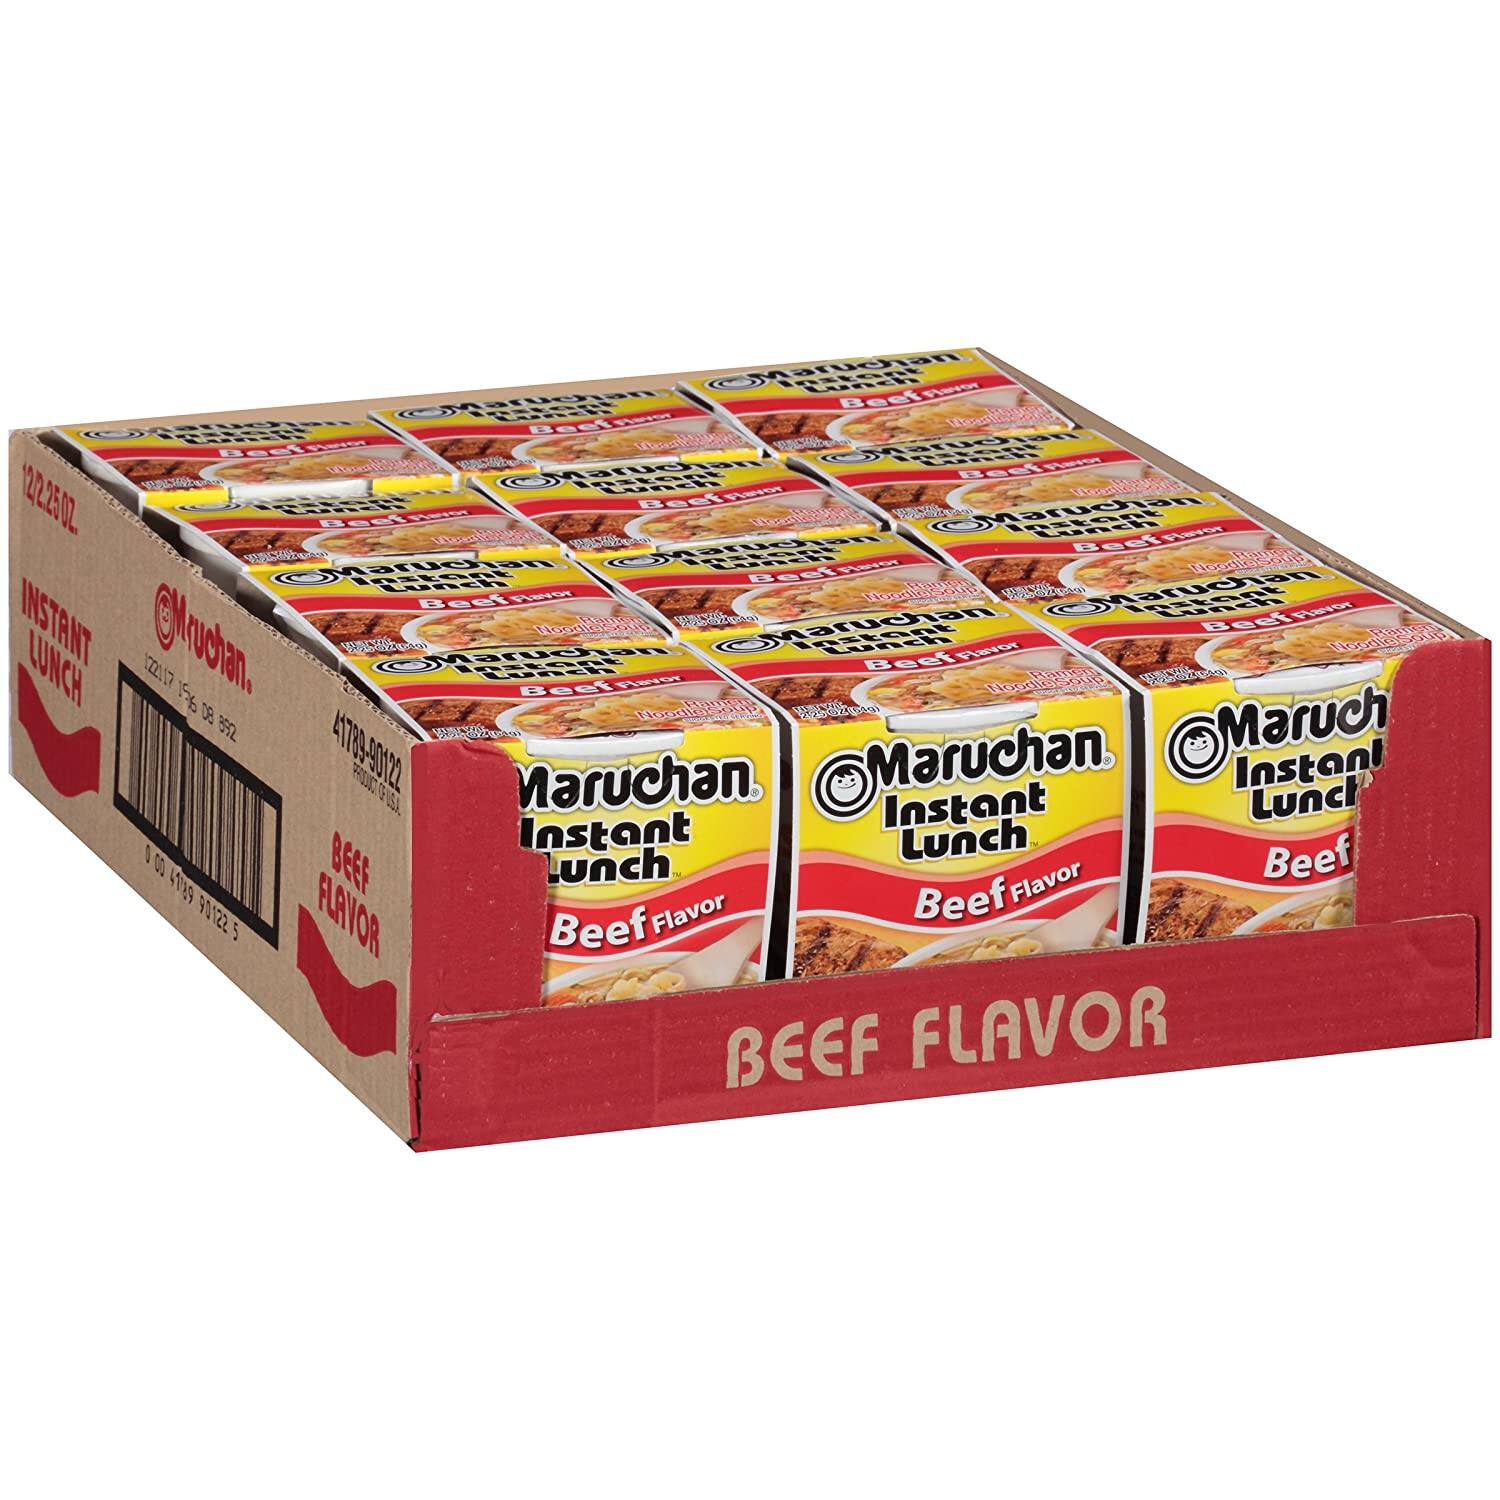 12-Pack 2.25-Oz Maruchan Instant Lunch (Beef) $3.50 + Free Shipping w/ Prime or $25+